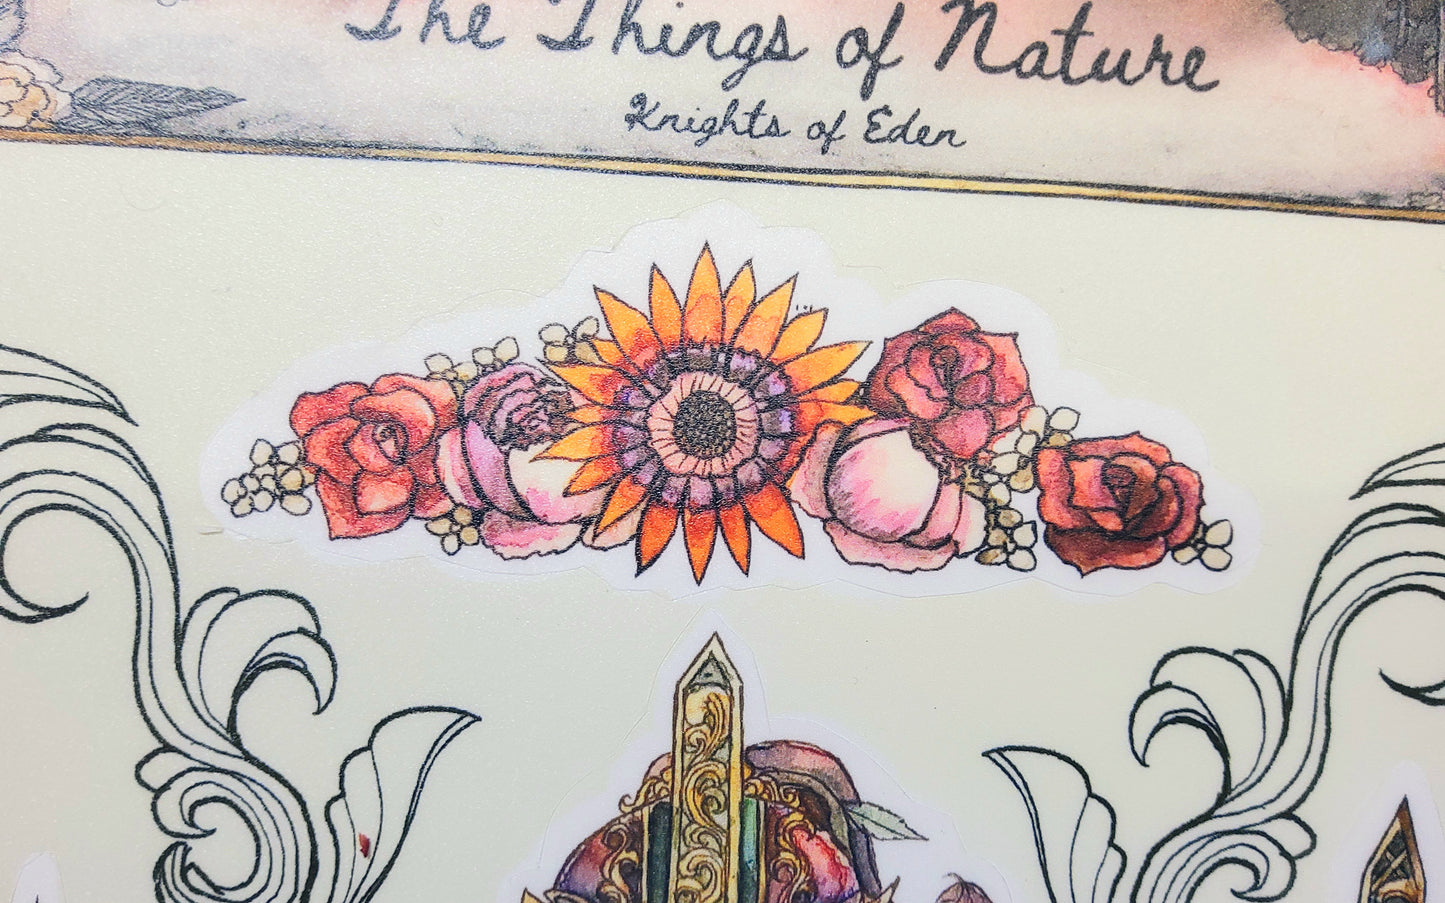 The Things of Nature: Knights of Eden Sticker Sheet #1